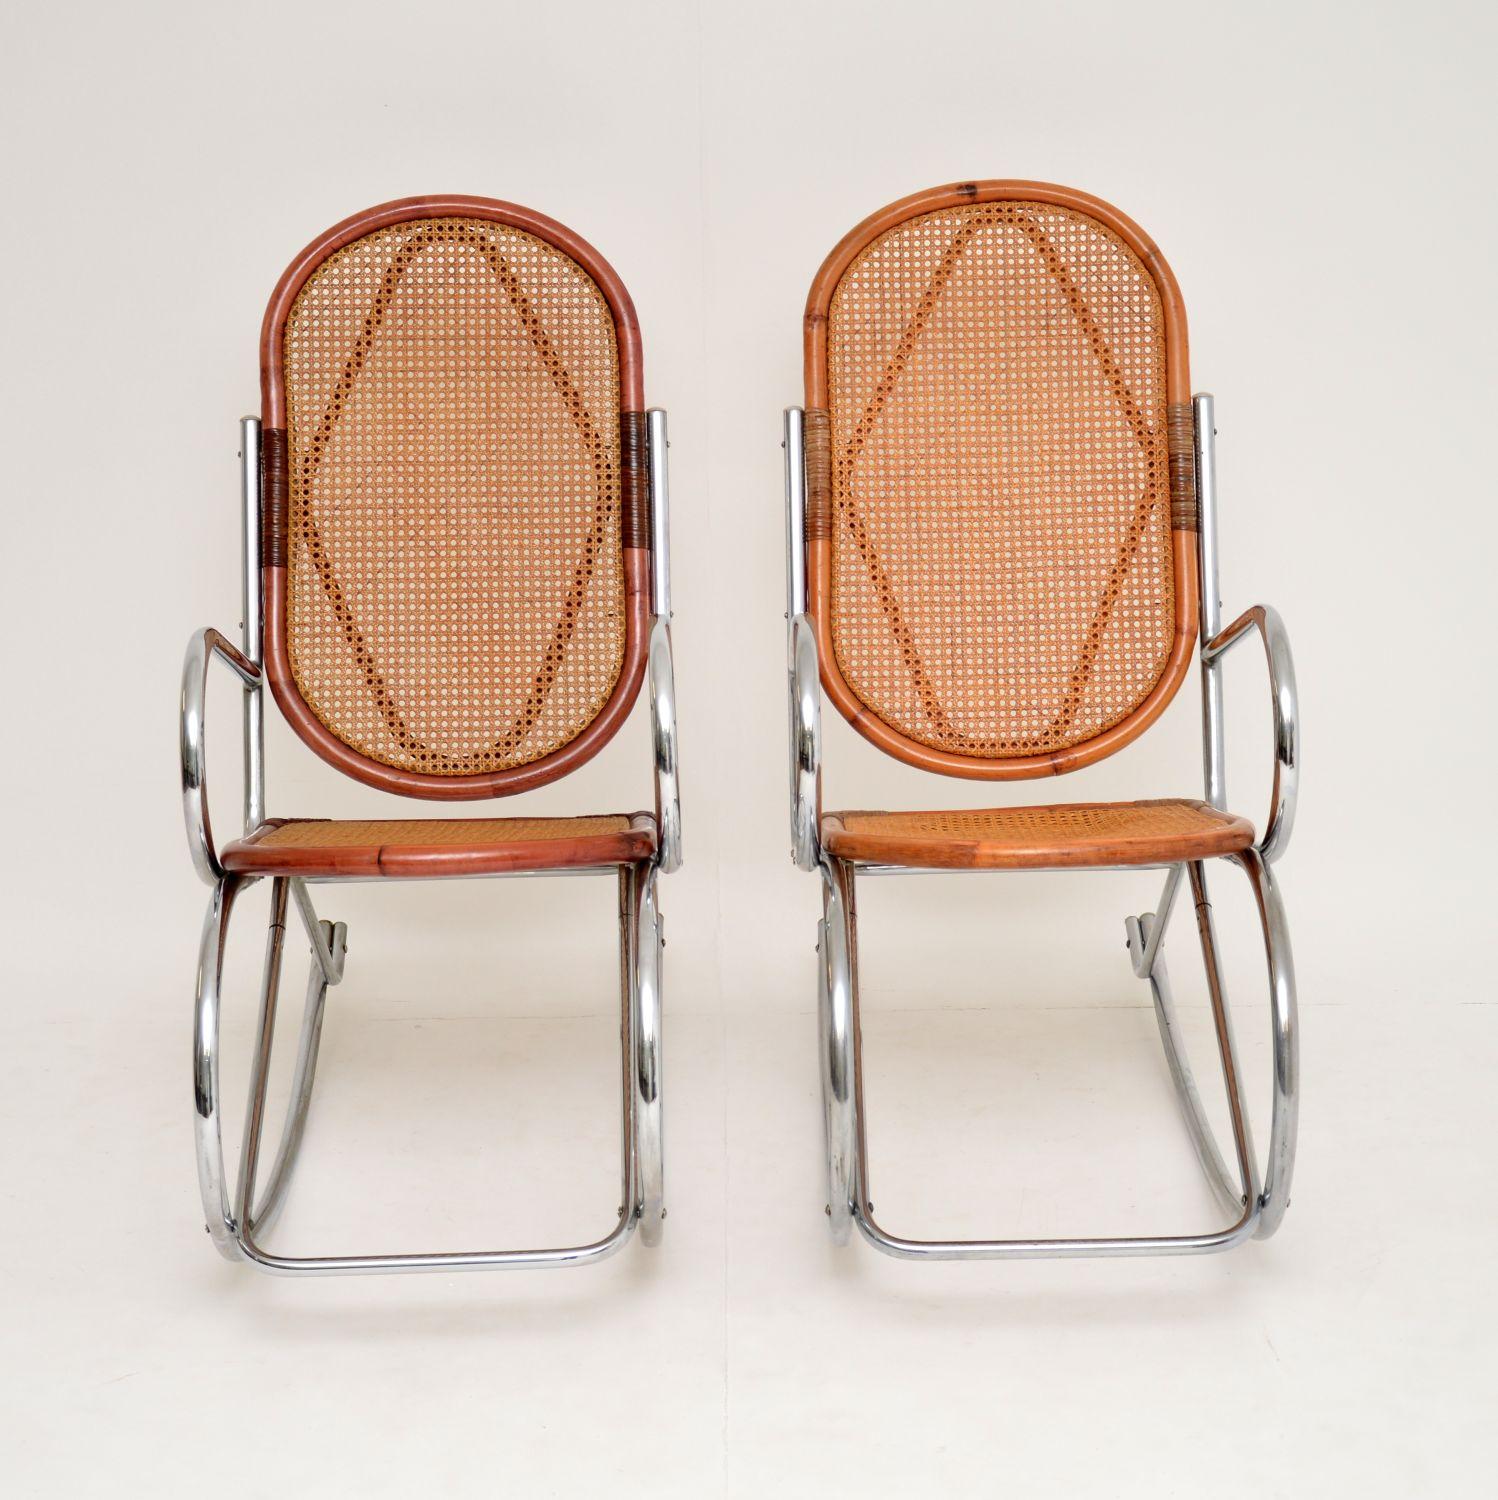 Mid-Century Modern 1970s Pair of Retro Chrome and Bamboo Rocking Chairs